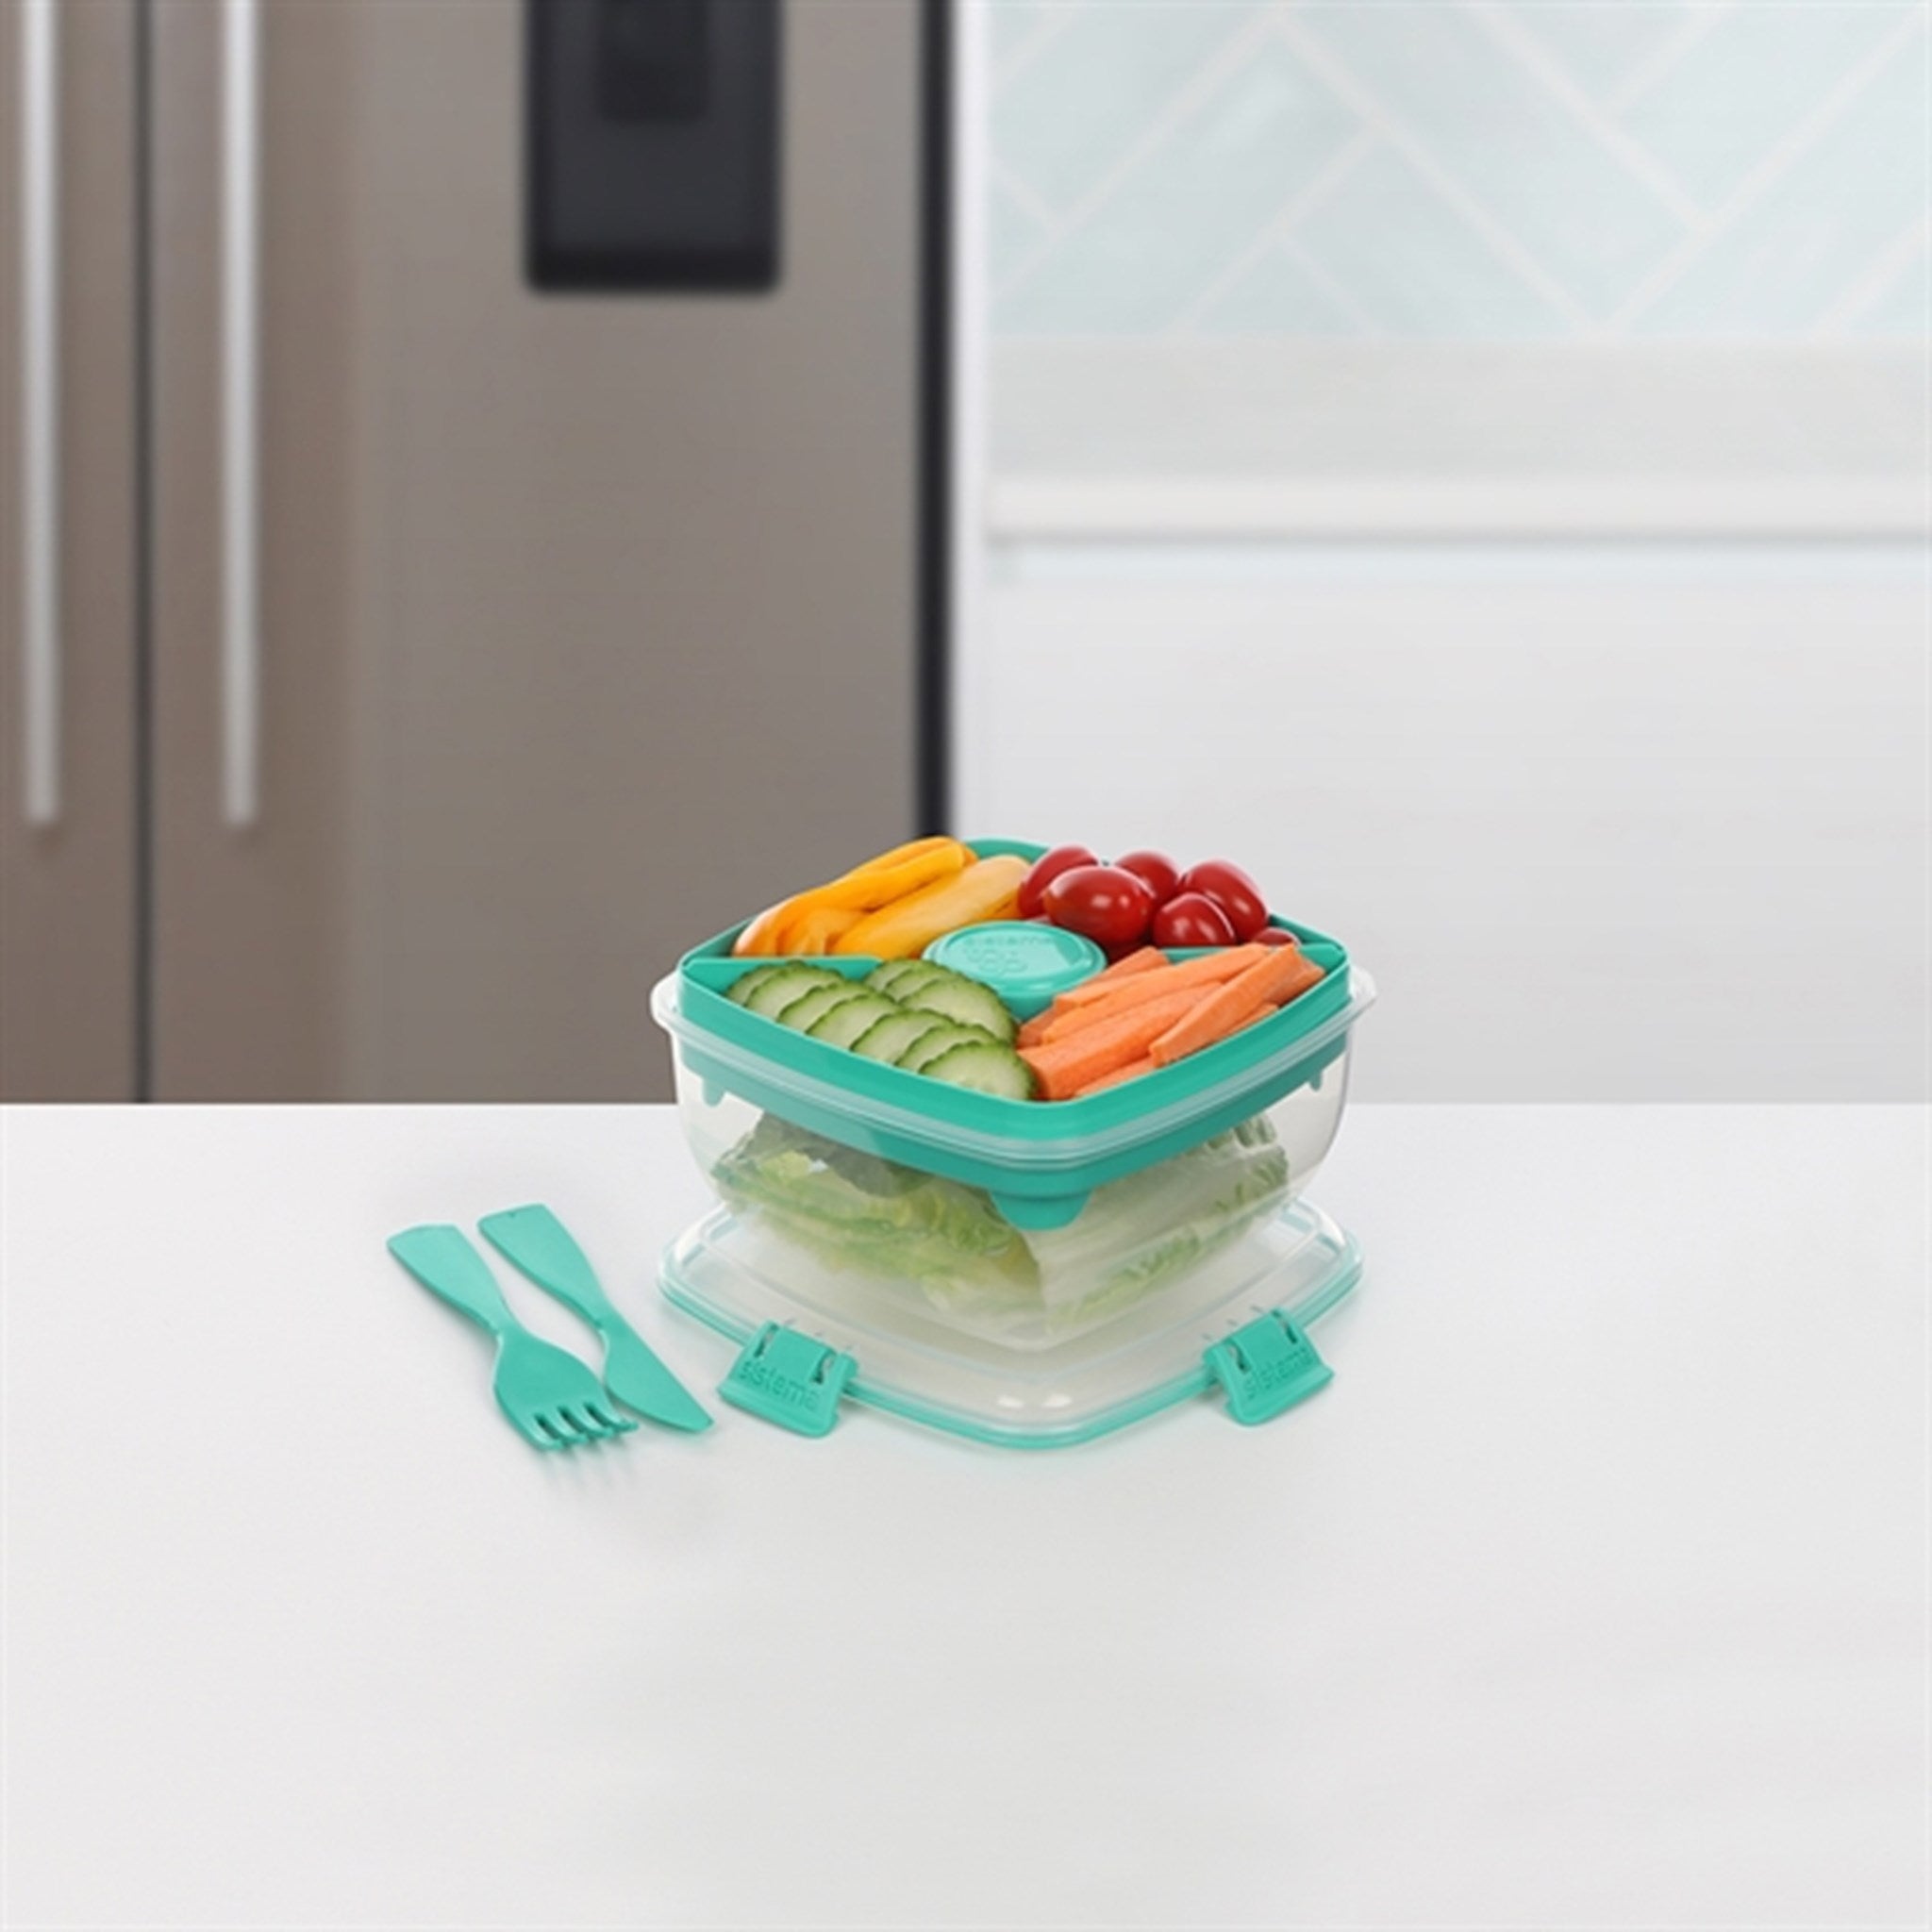 Sistema To Go Salad Lunch Box 1,1 L Minty Teal 2